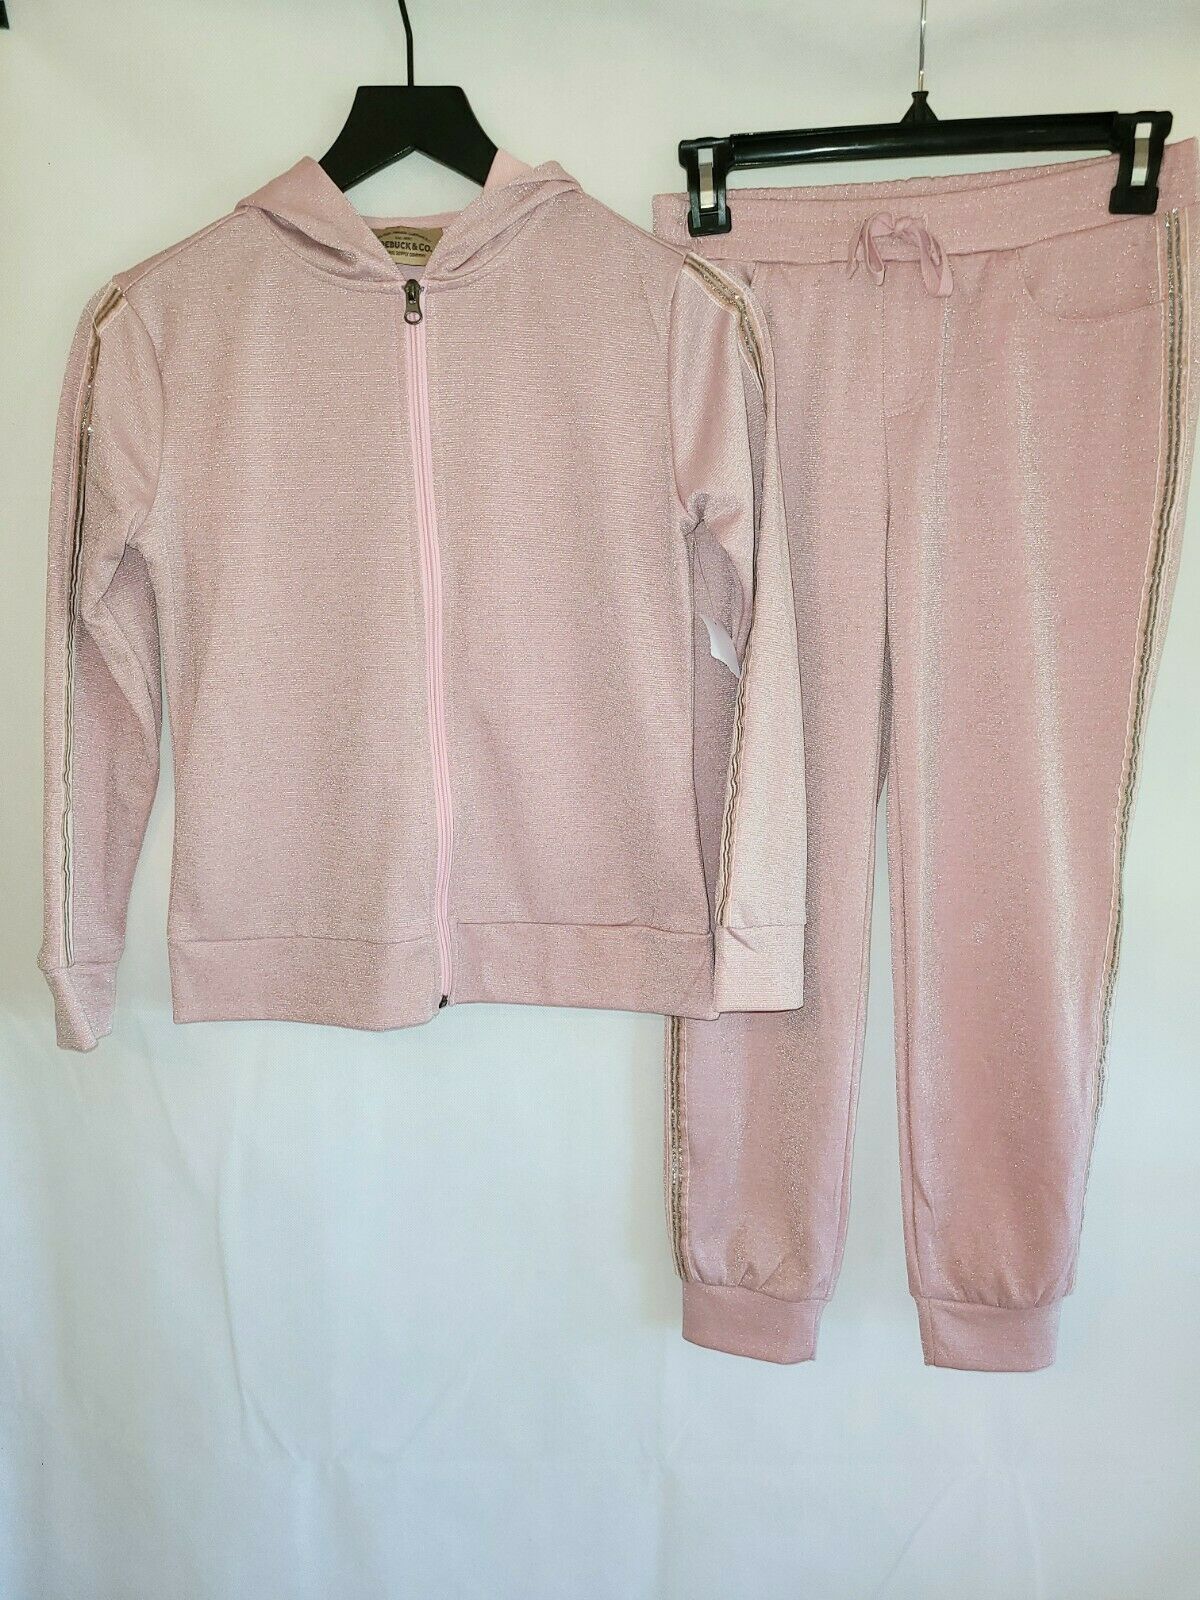 Roebuck & Co. Girls Medium 10/12 Two Piece Jogger Style Track Suit Pink Nwt